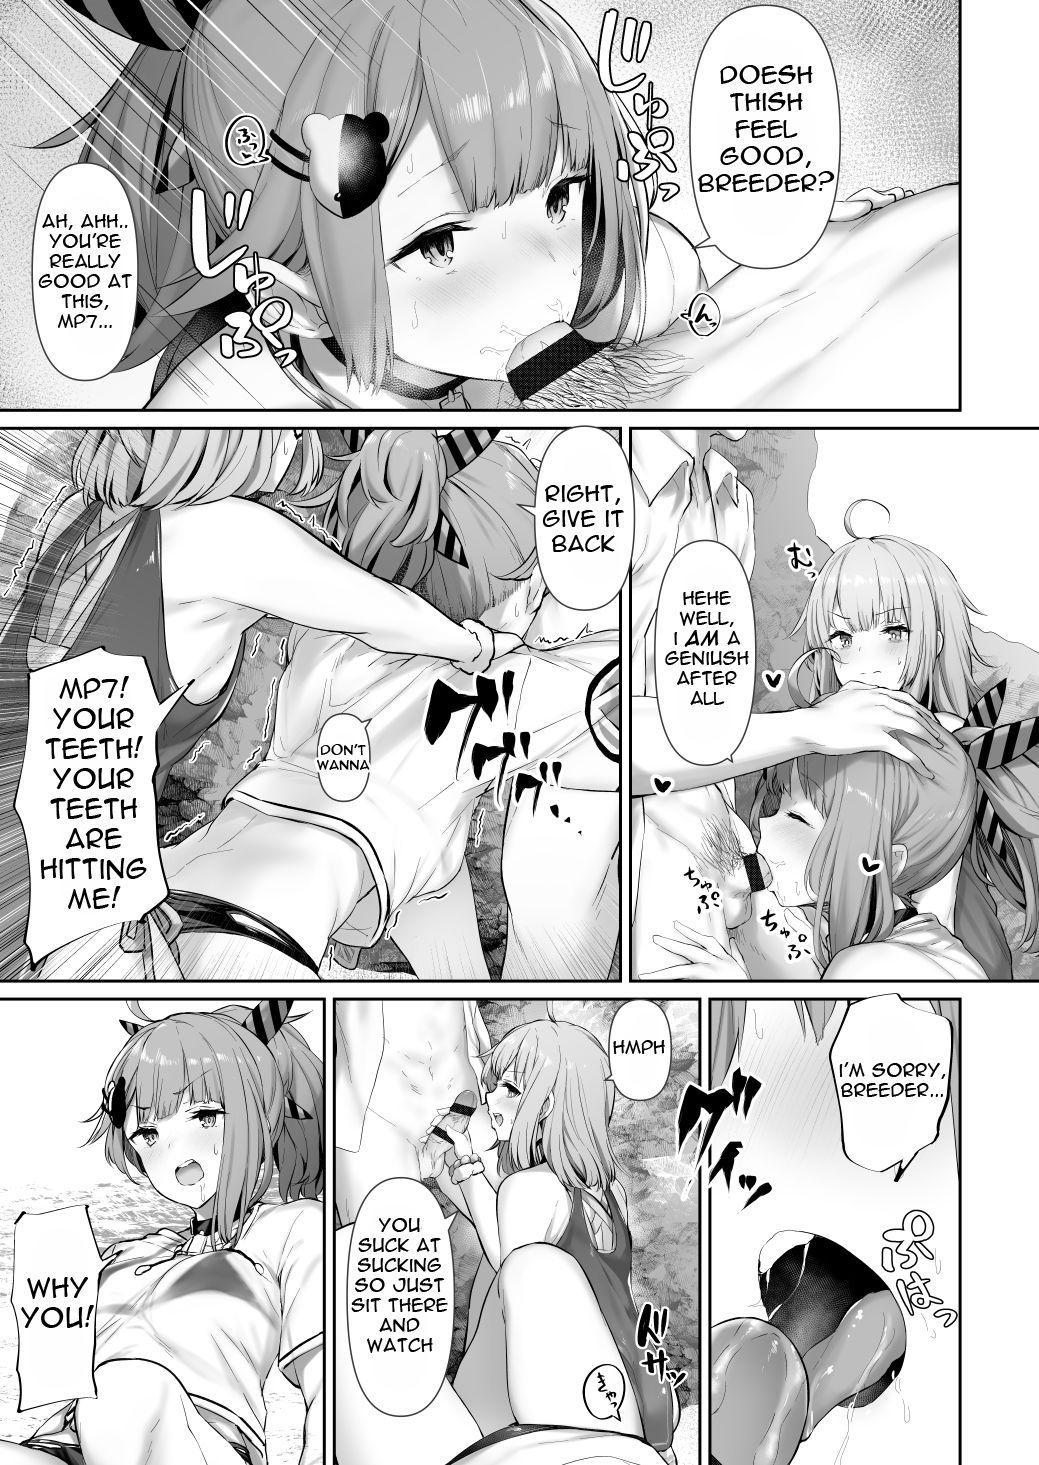 Moan MP7 and AA-12 no - Girls frontline Realamateur - Page 3